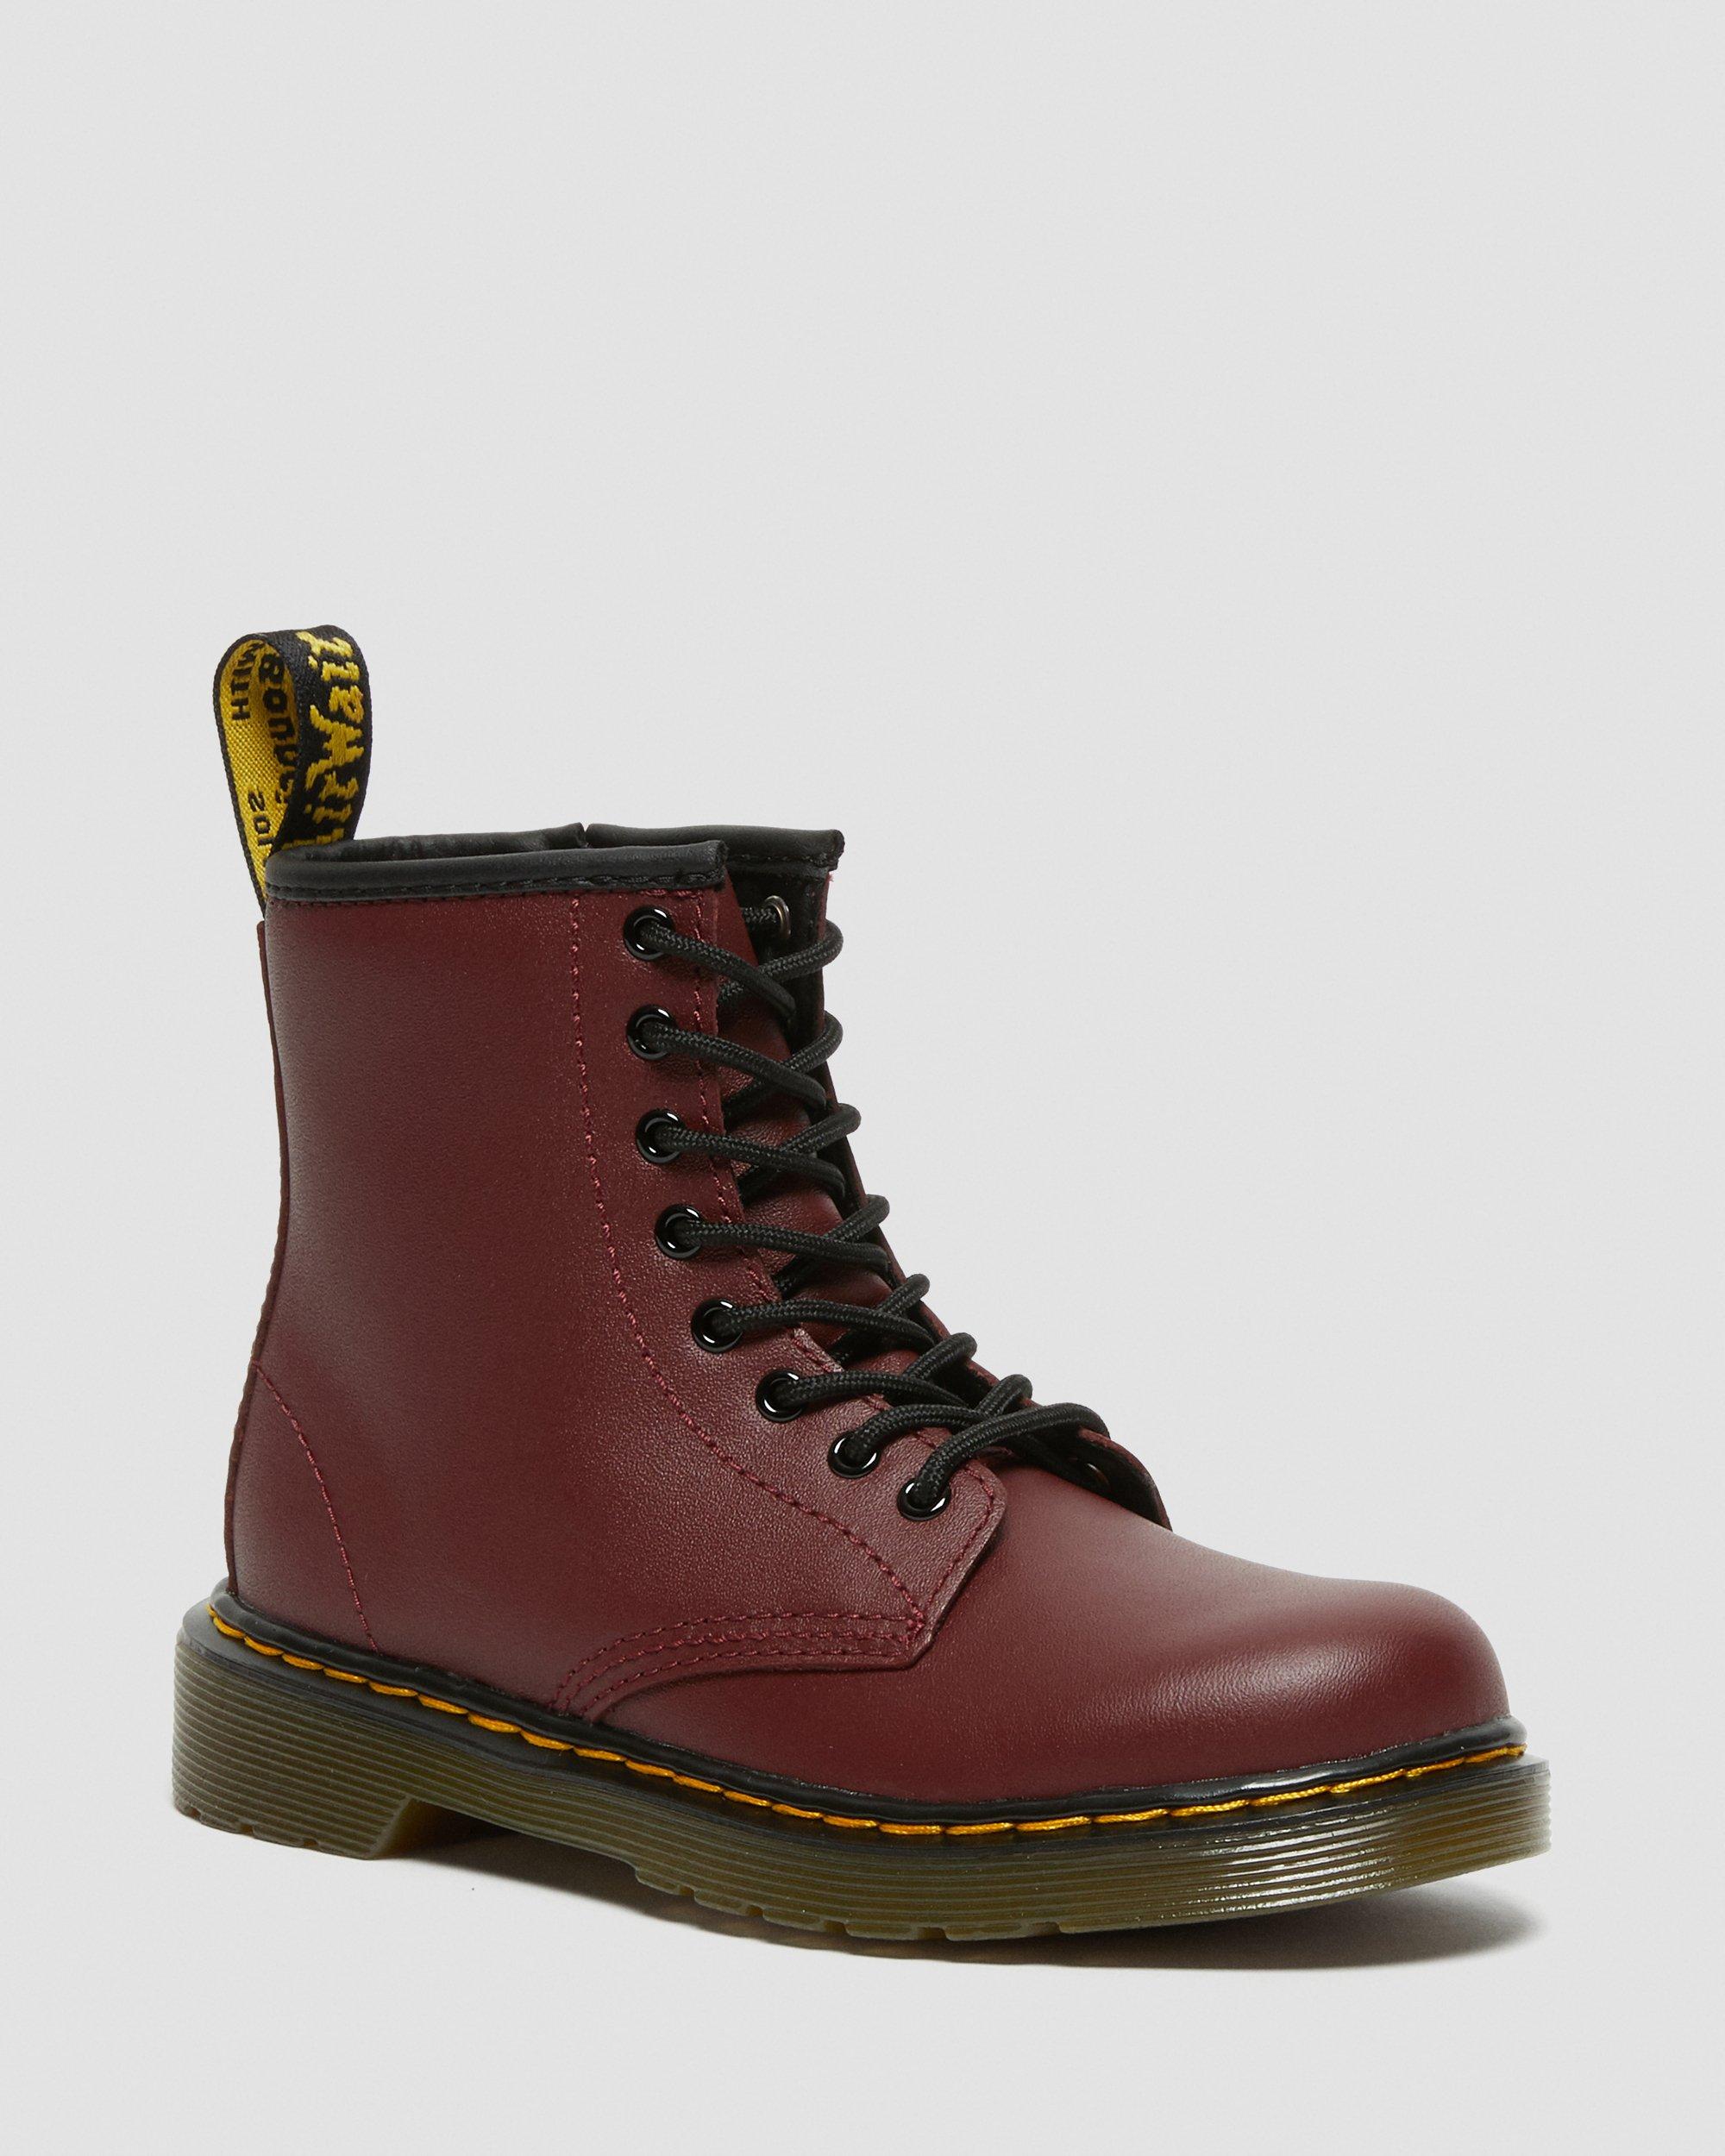 Junior 1460 Softy T Leather Lace Up Boots in Cherry Red | Dr. Martens